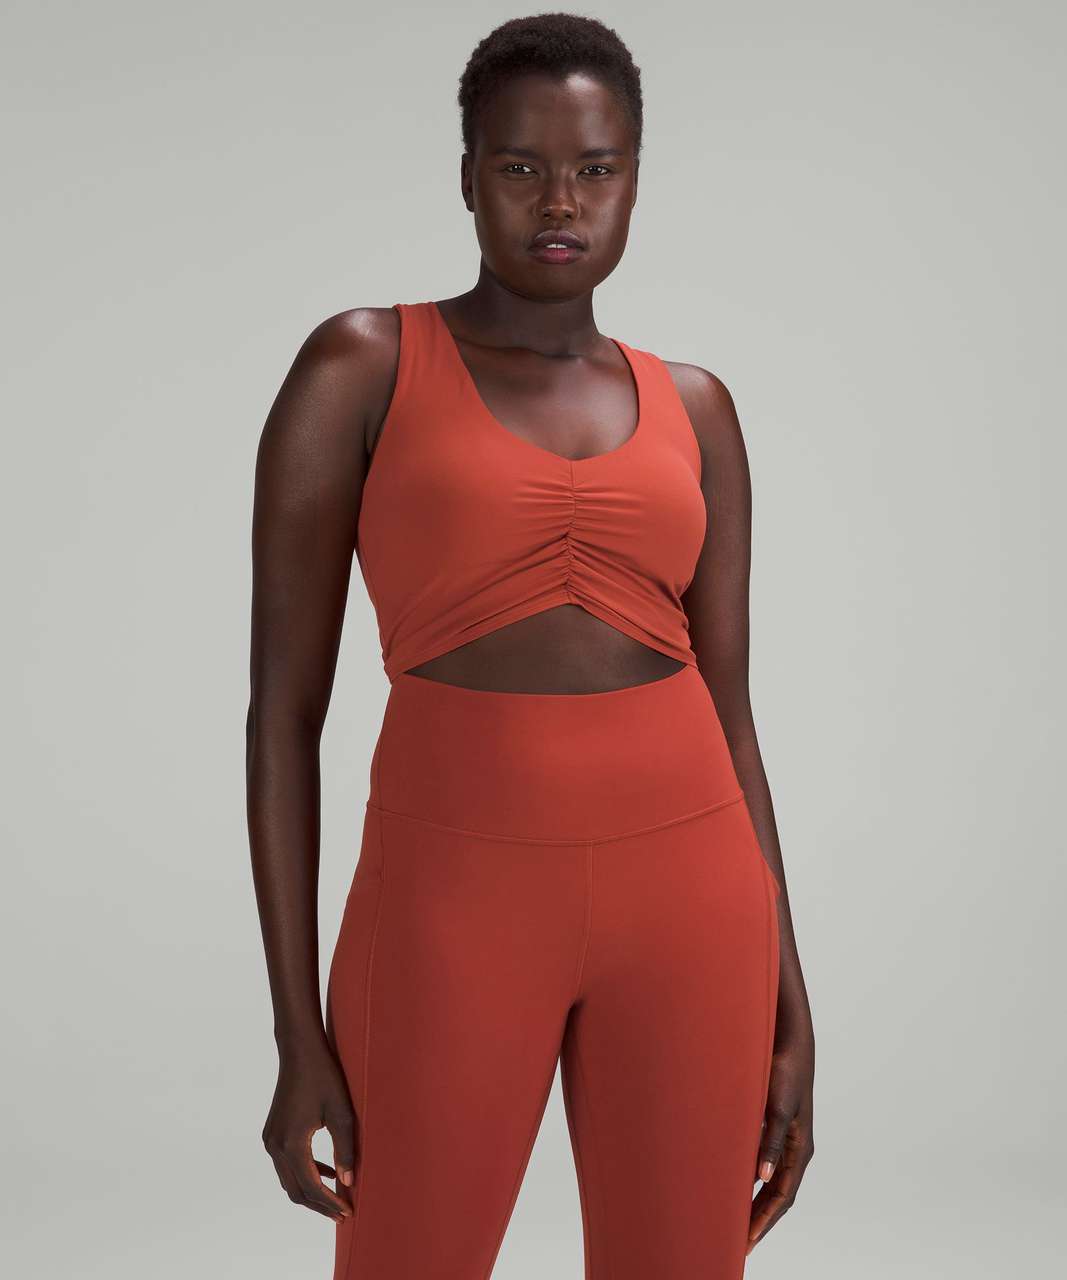 Lu Lu Yoga Lemon Camisole: Energy Longline Bra With Padded Criss Cross Back  For Fitness, Running, And Sweat Wicking Medium Support Fabletics Pink  Sports Bra With Sexy Padding From Yoganiceonline, $5.25